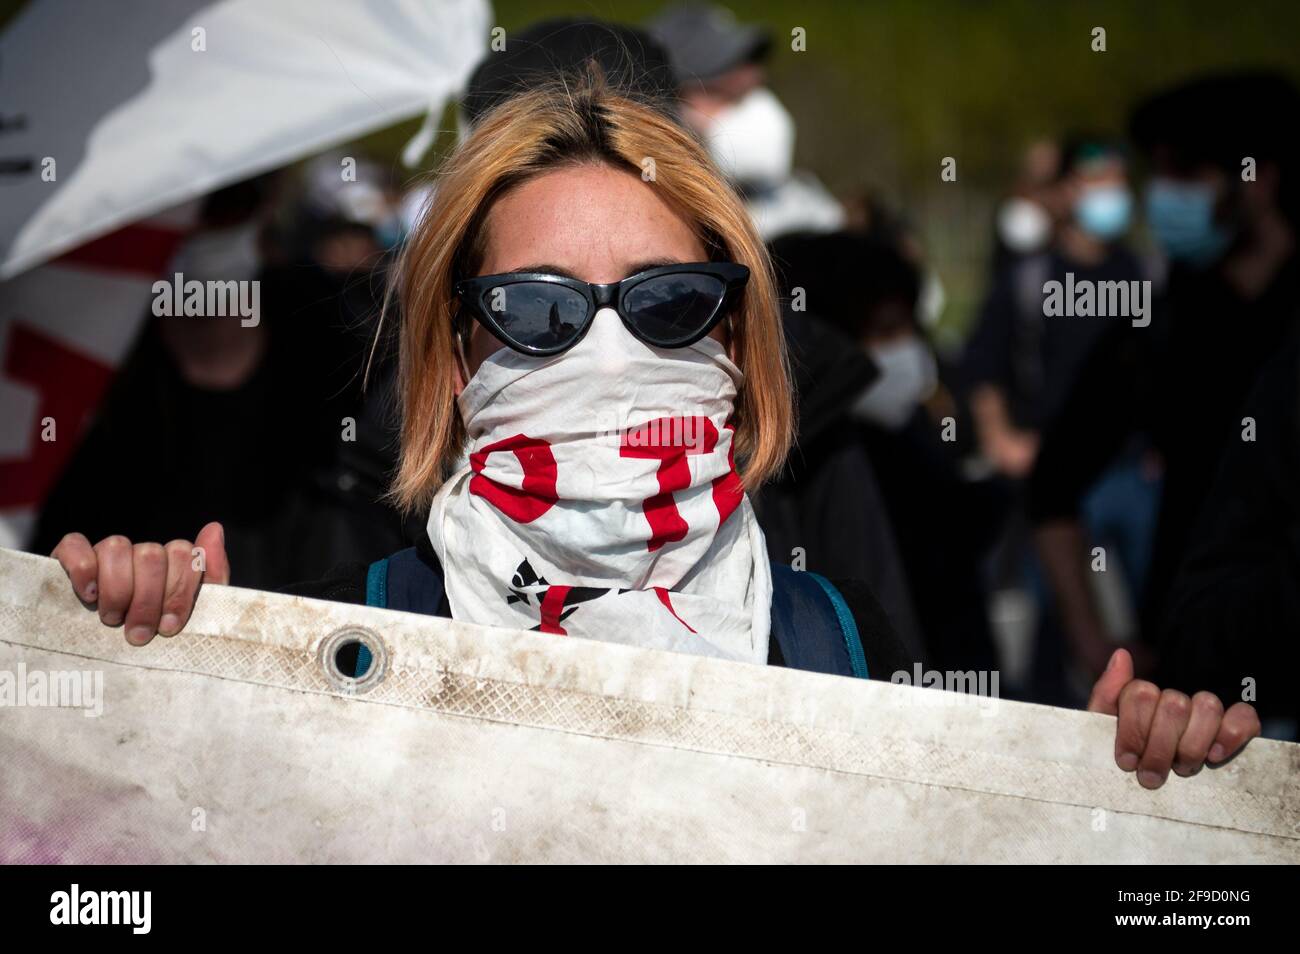 San Didero, Italy. 17 April 2021. A demonstrator looks on during a 'No TAV' (No to high-speed train) demonstration against Lyon-Turin high speed rail link. Credit: Nicolò Campo/Alamy Live News Stock Photo